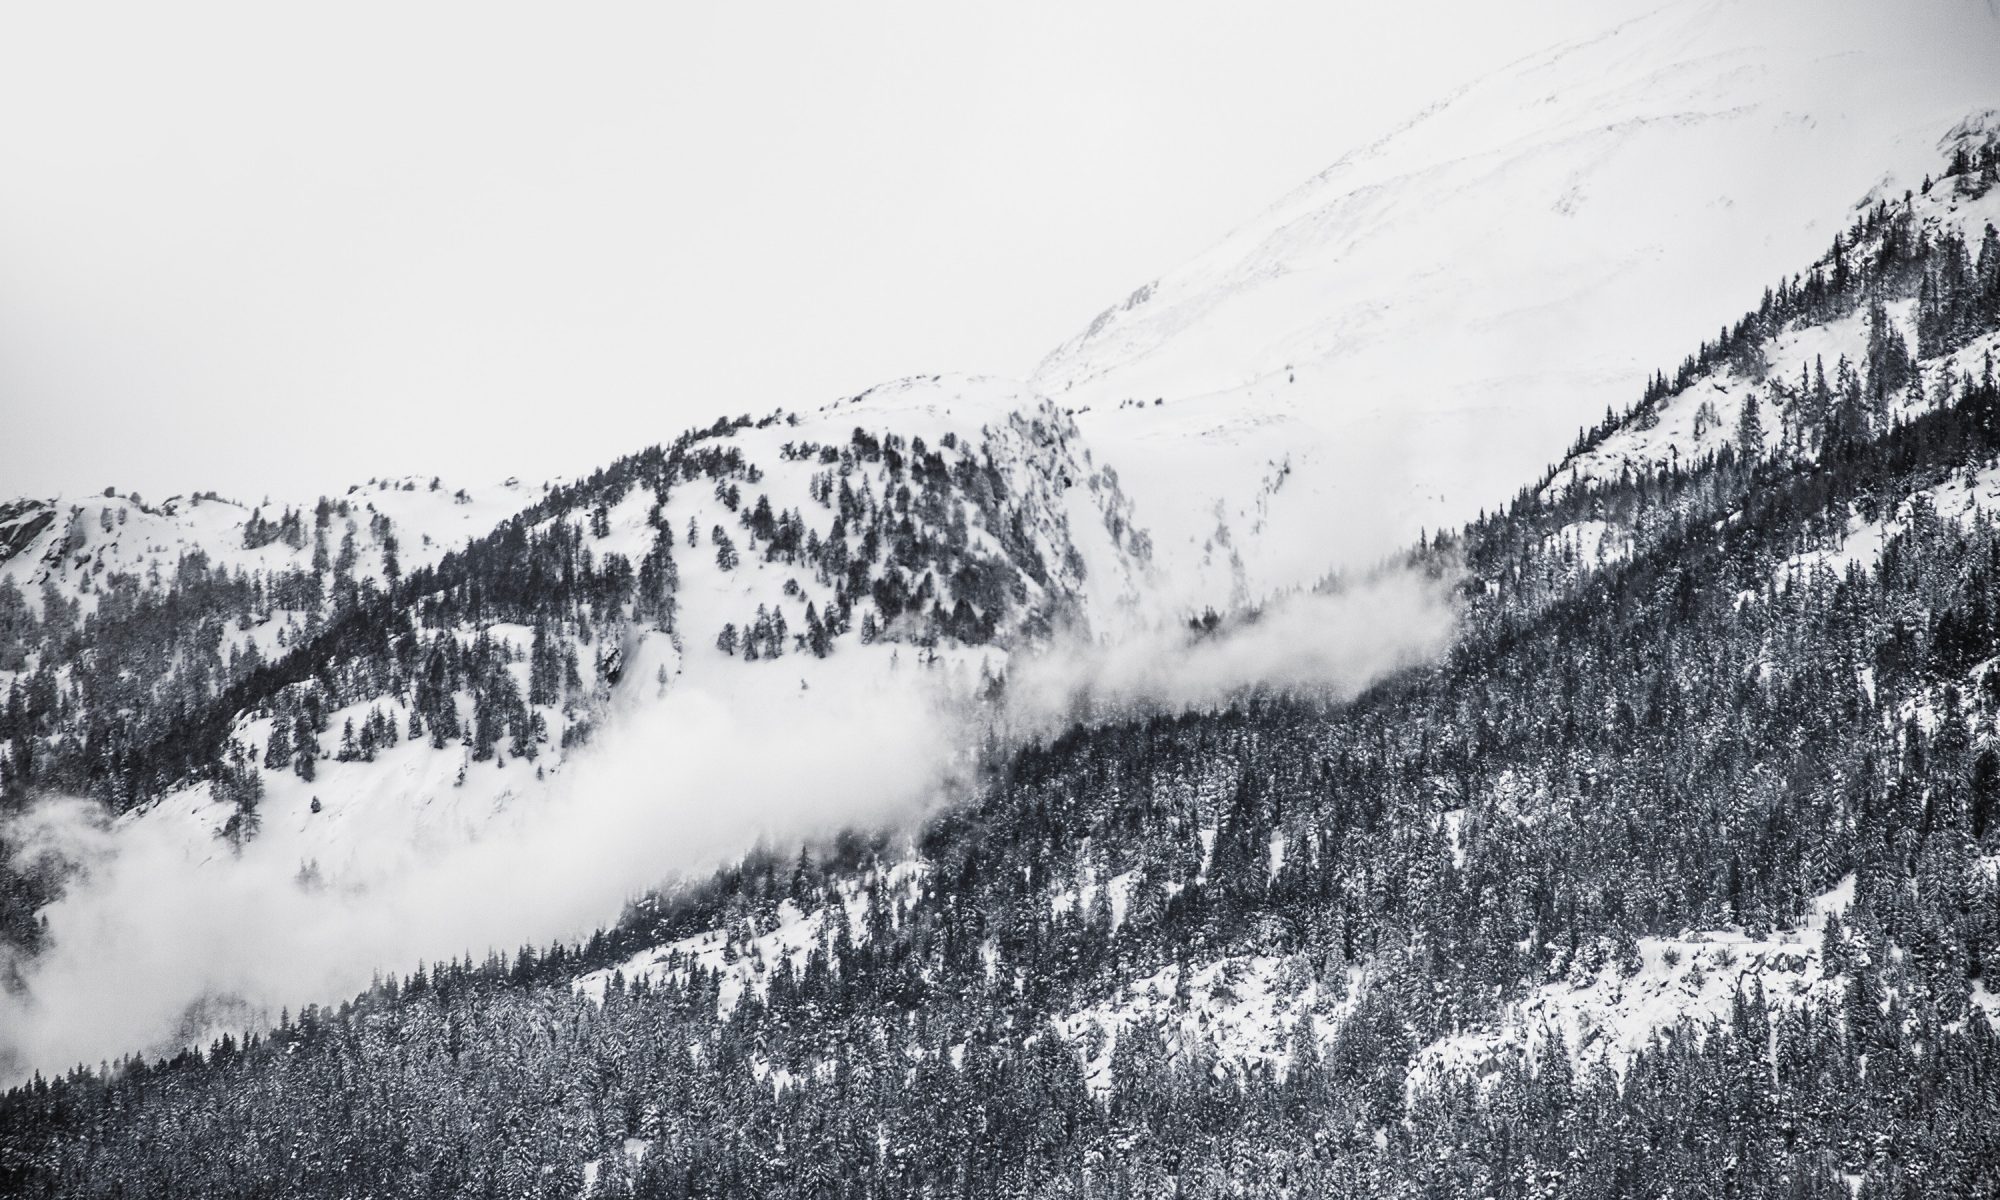 An avalanche has swept two cars while crossing the Klausen Pass in Switzerland. THREE HURT: Cars swept away by Swiss alpine pass avalanche. Photo of an avalanche by Caspar Rubin - Unsplash.